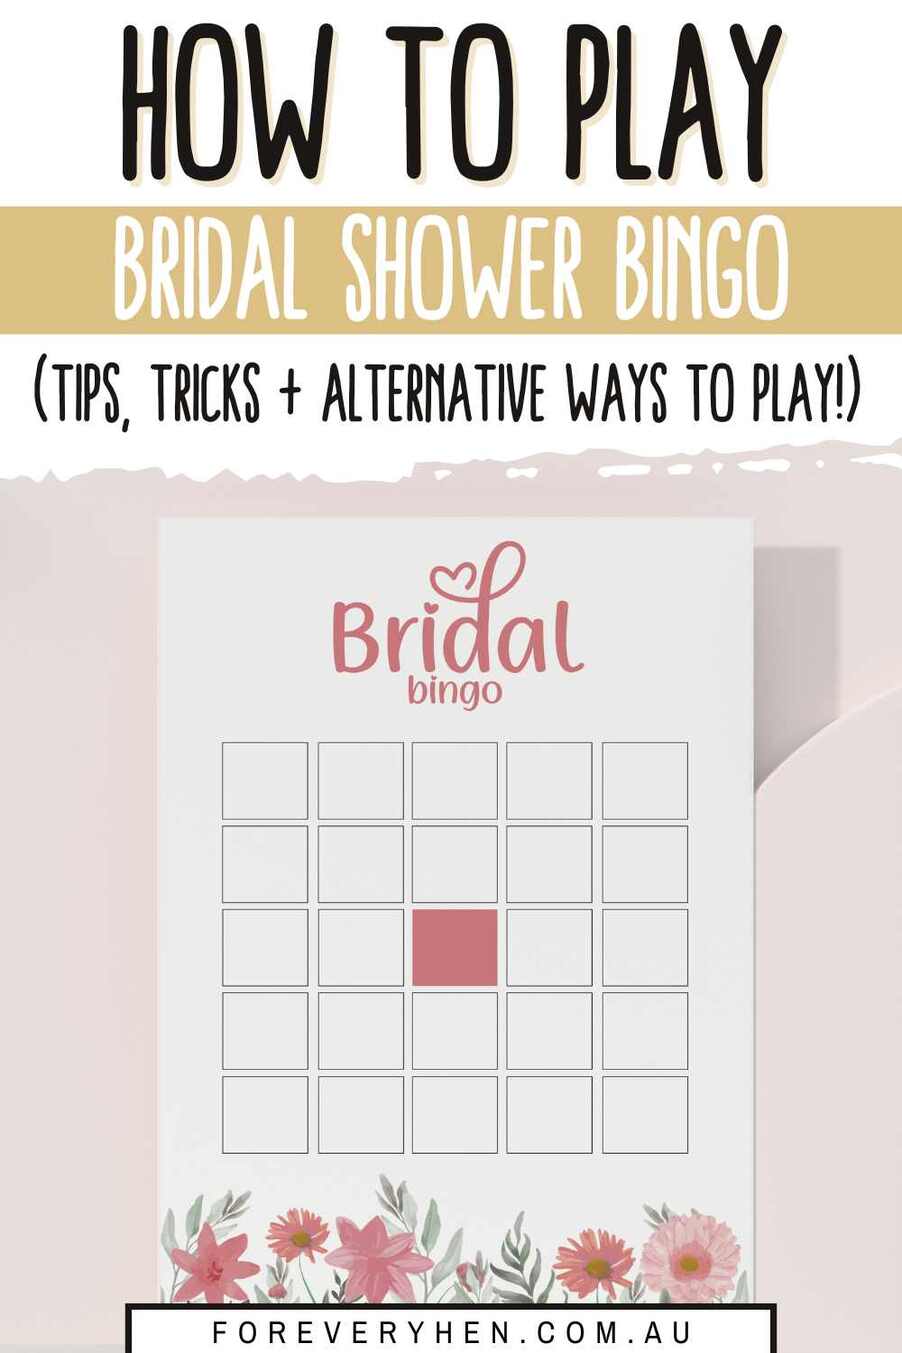 Image of three bridal shower bingo playing cards on a table. Text overlay: How to play bridal shower bingo (instructions + printables!)